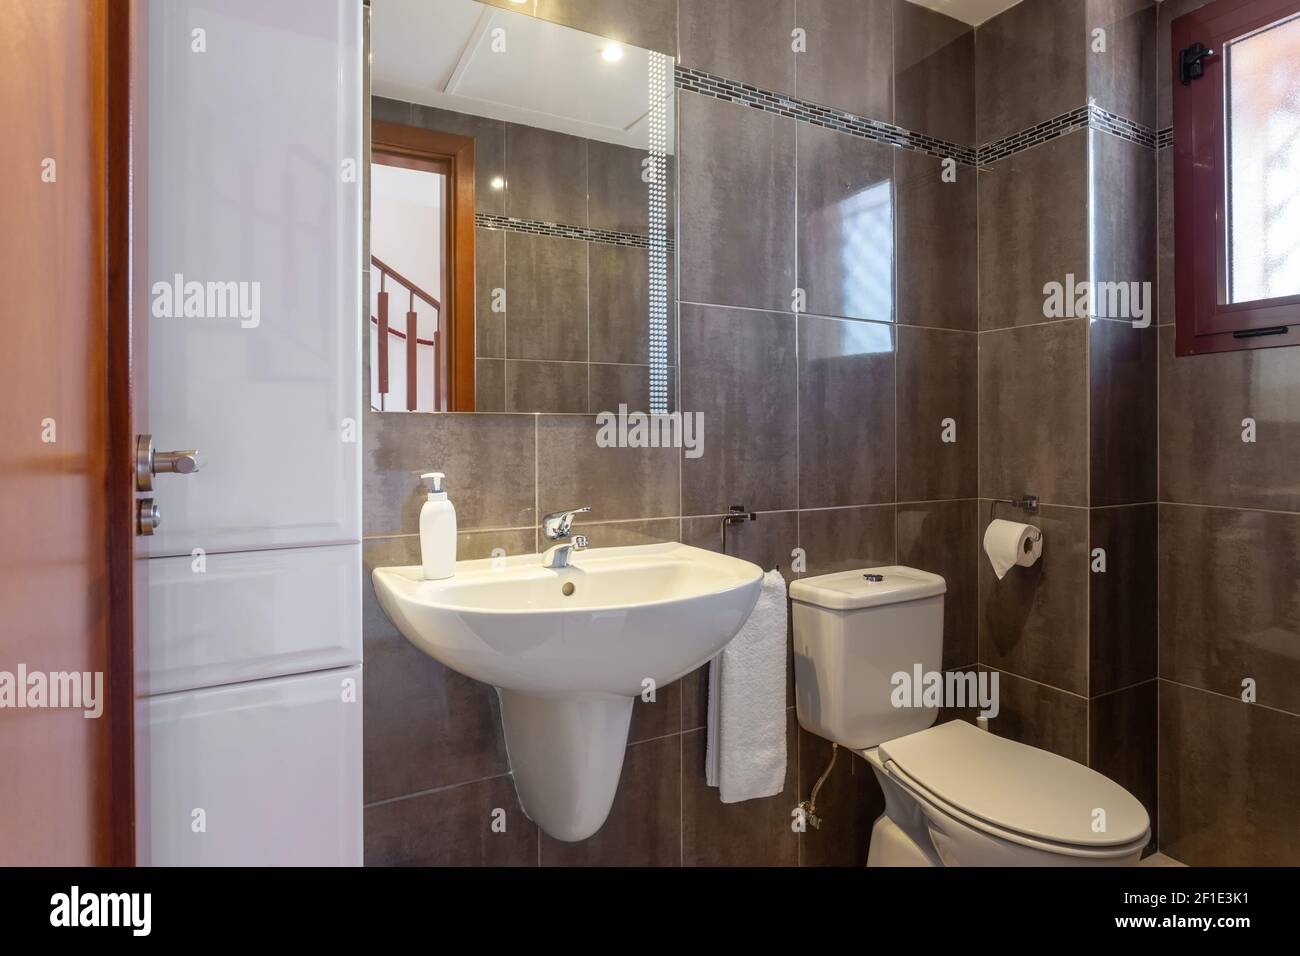 Beige colored bathroom interior, a shower with a glass door and a ceramic toilet, also a few towels on the walls. Stock Photo